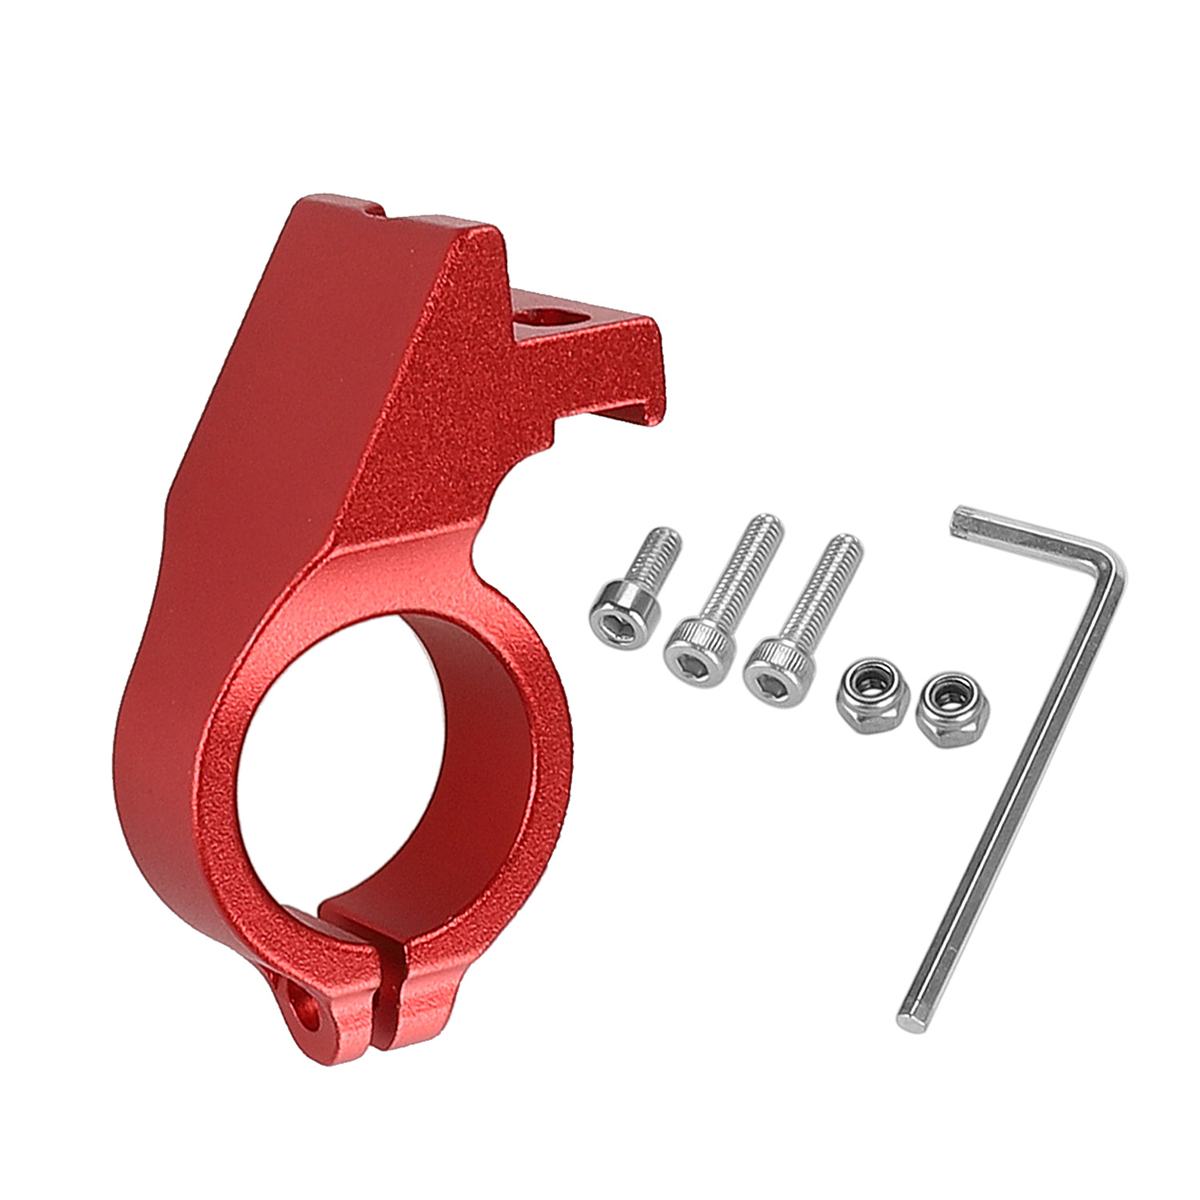 Electric Scooter Display Aluminum Fixed Bracket for 22mm Diameter